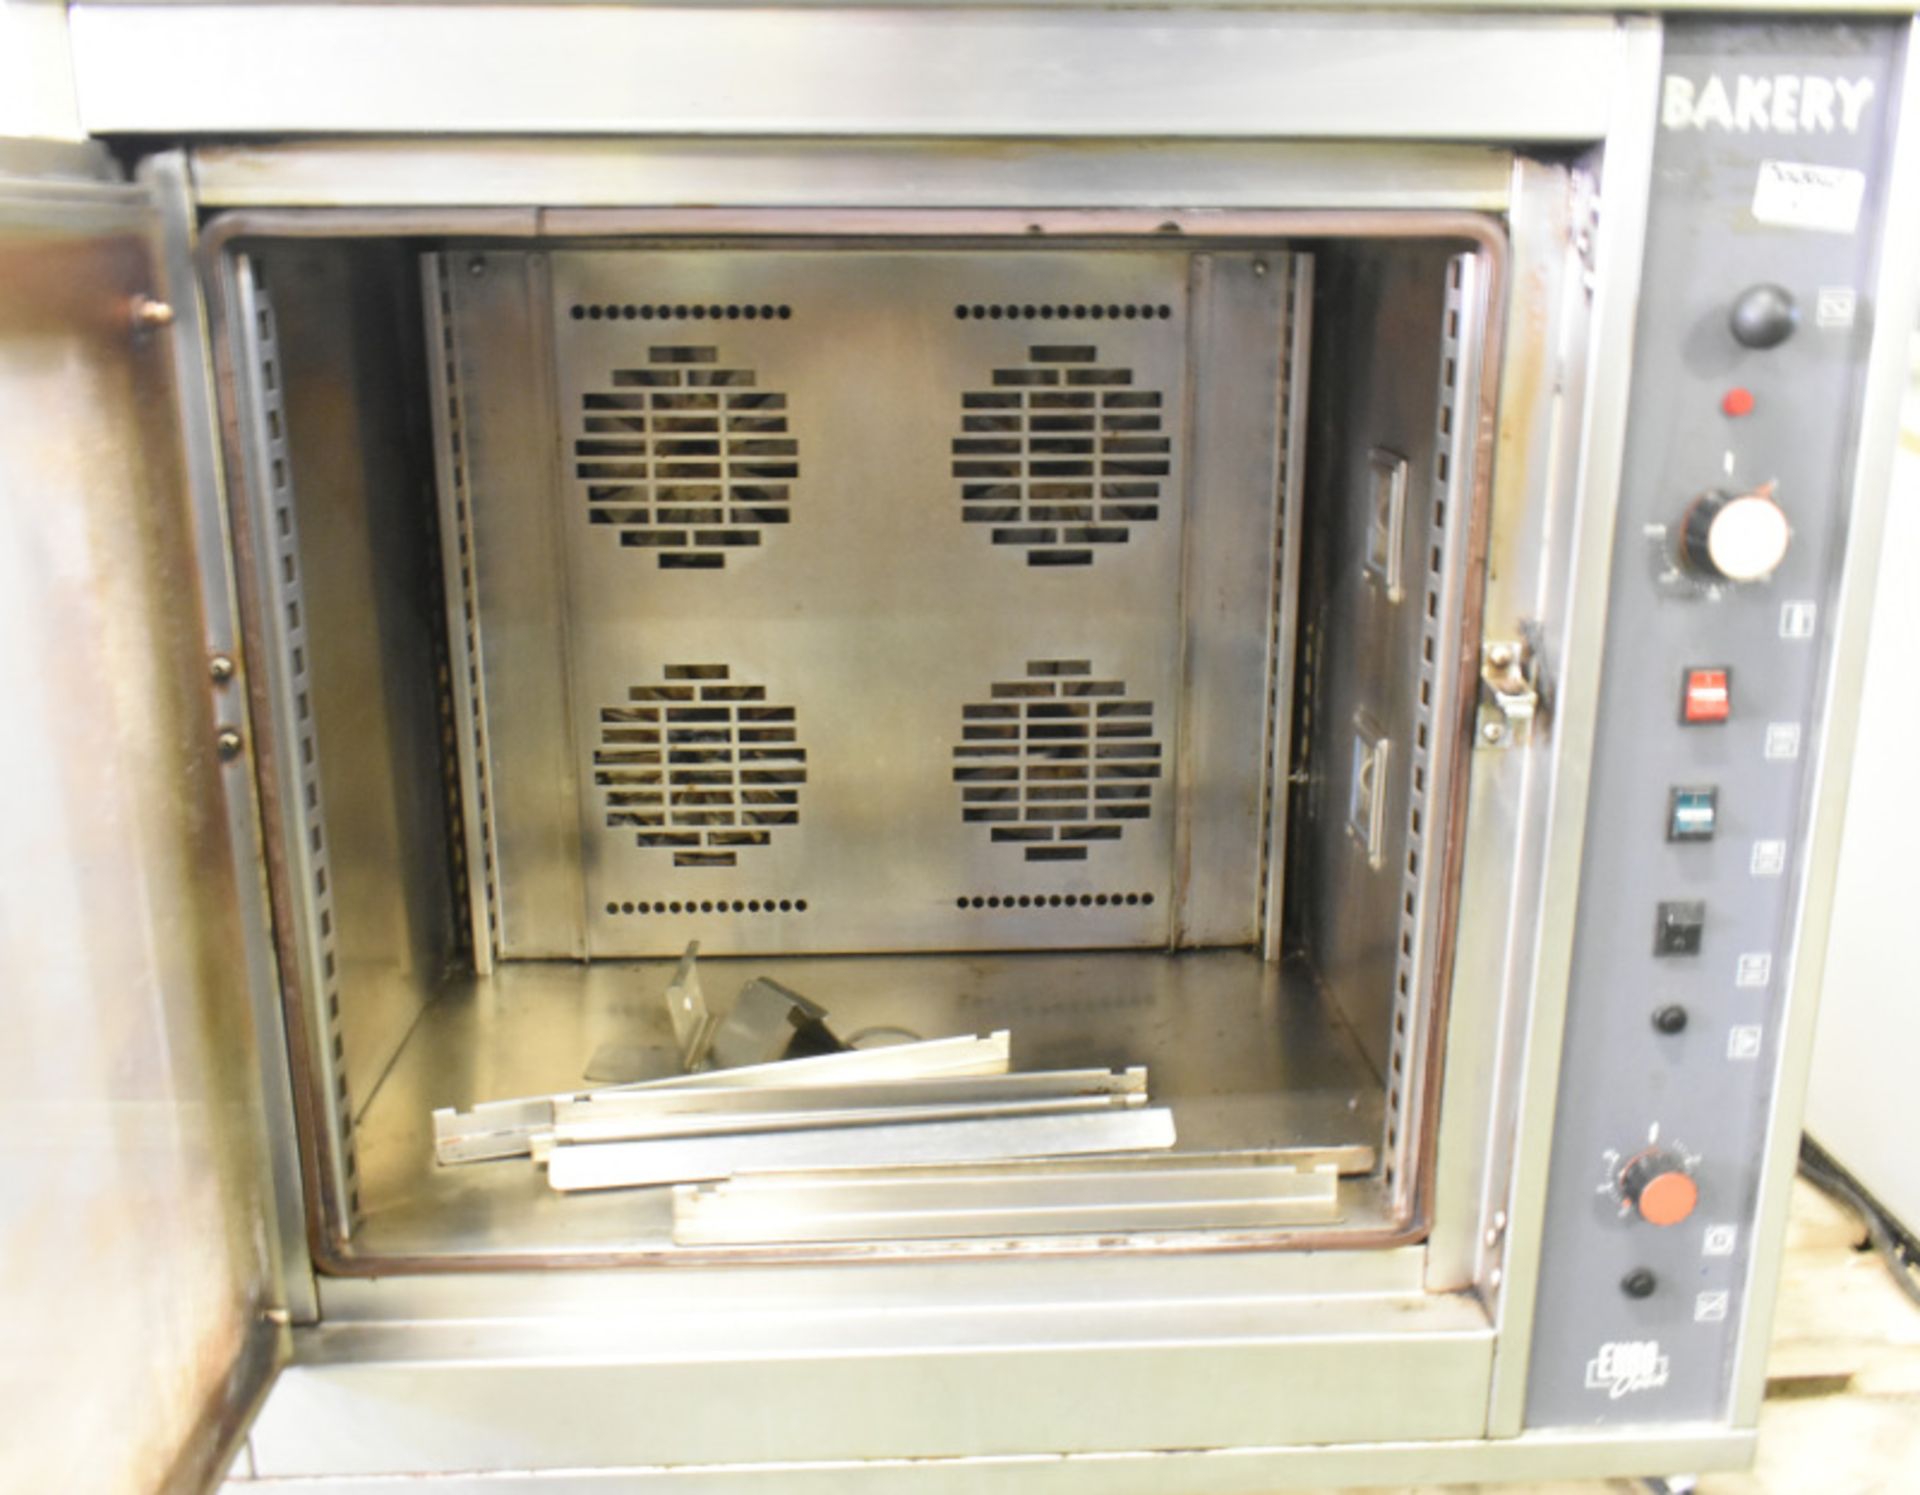 Euro bakery oven L 91 x W 73 x H 87cm - Image 3 of 6